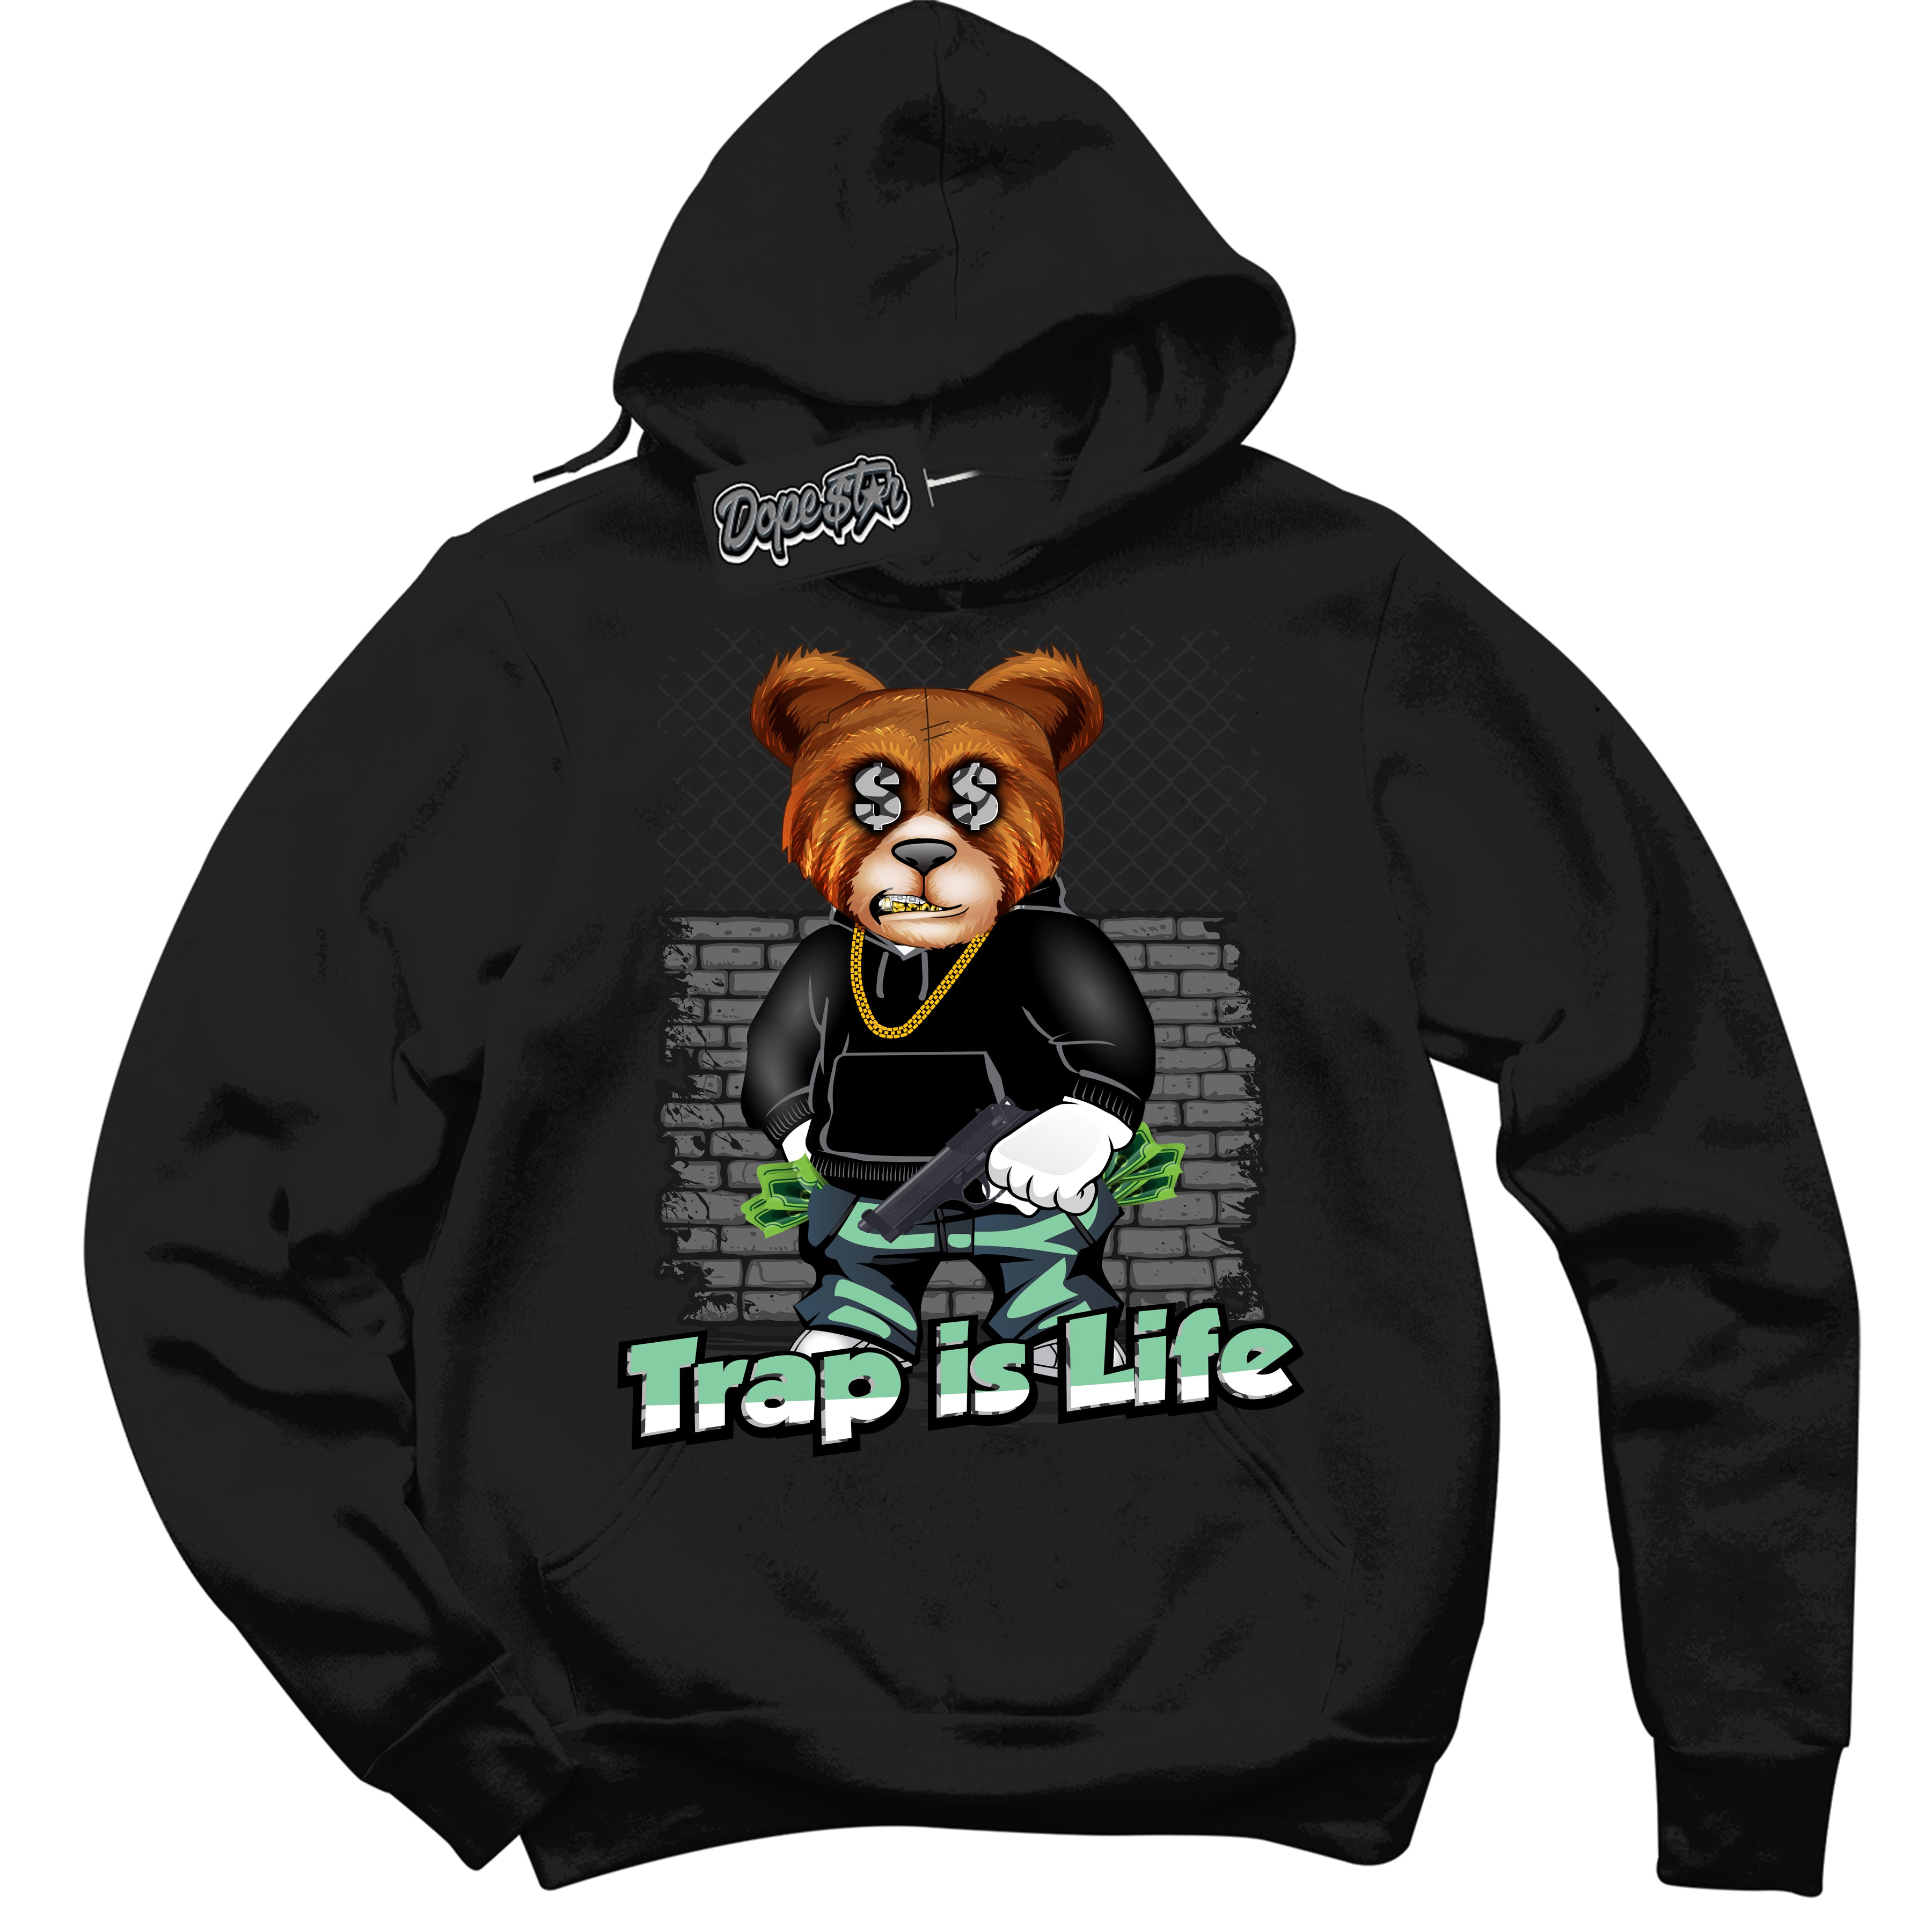 Cool Black Graphic DopeStar Hoodie with “ Trap Is Life “ print, that perfectly matches Green Glow 3S sneakers